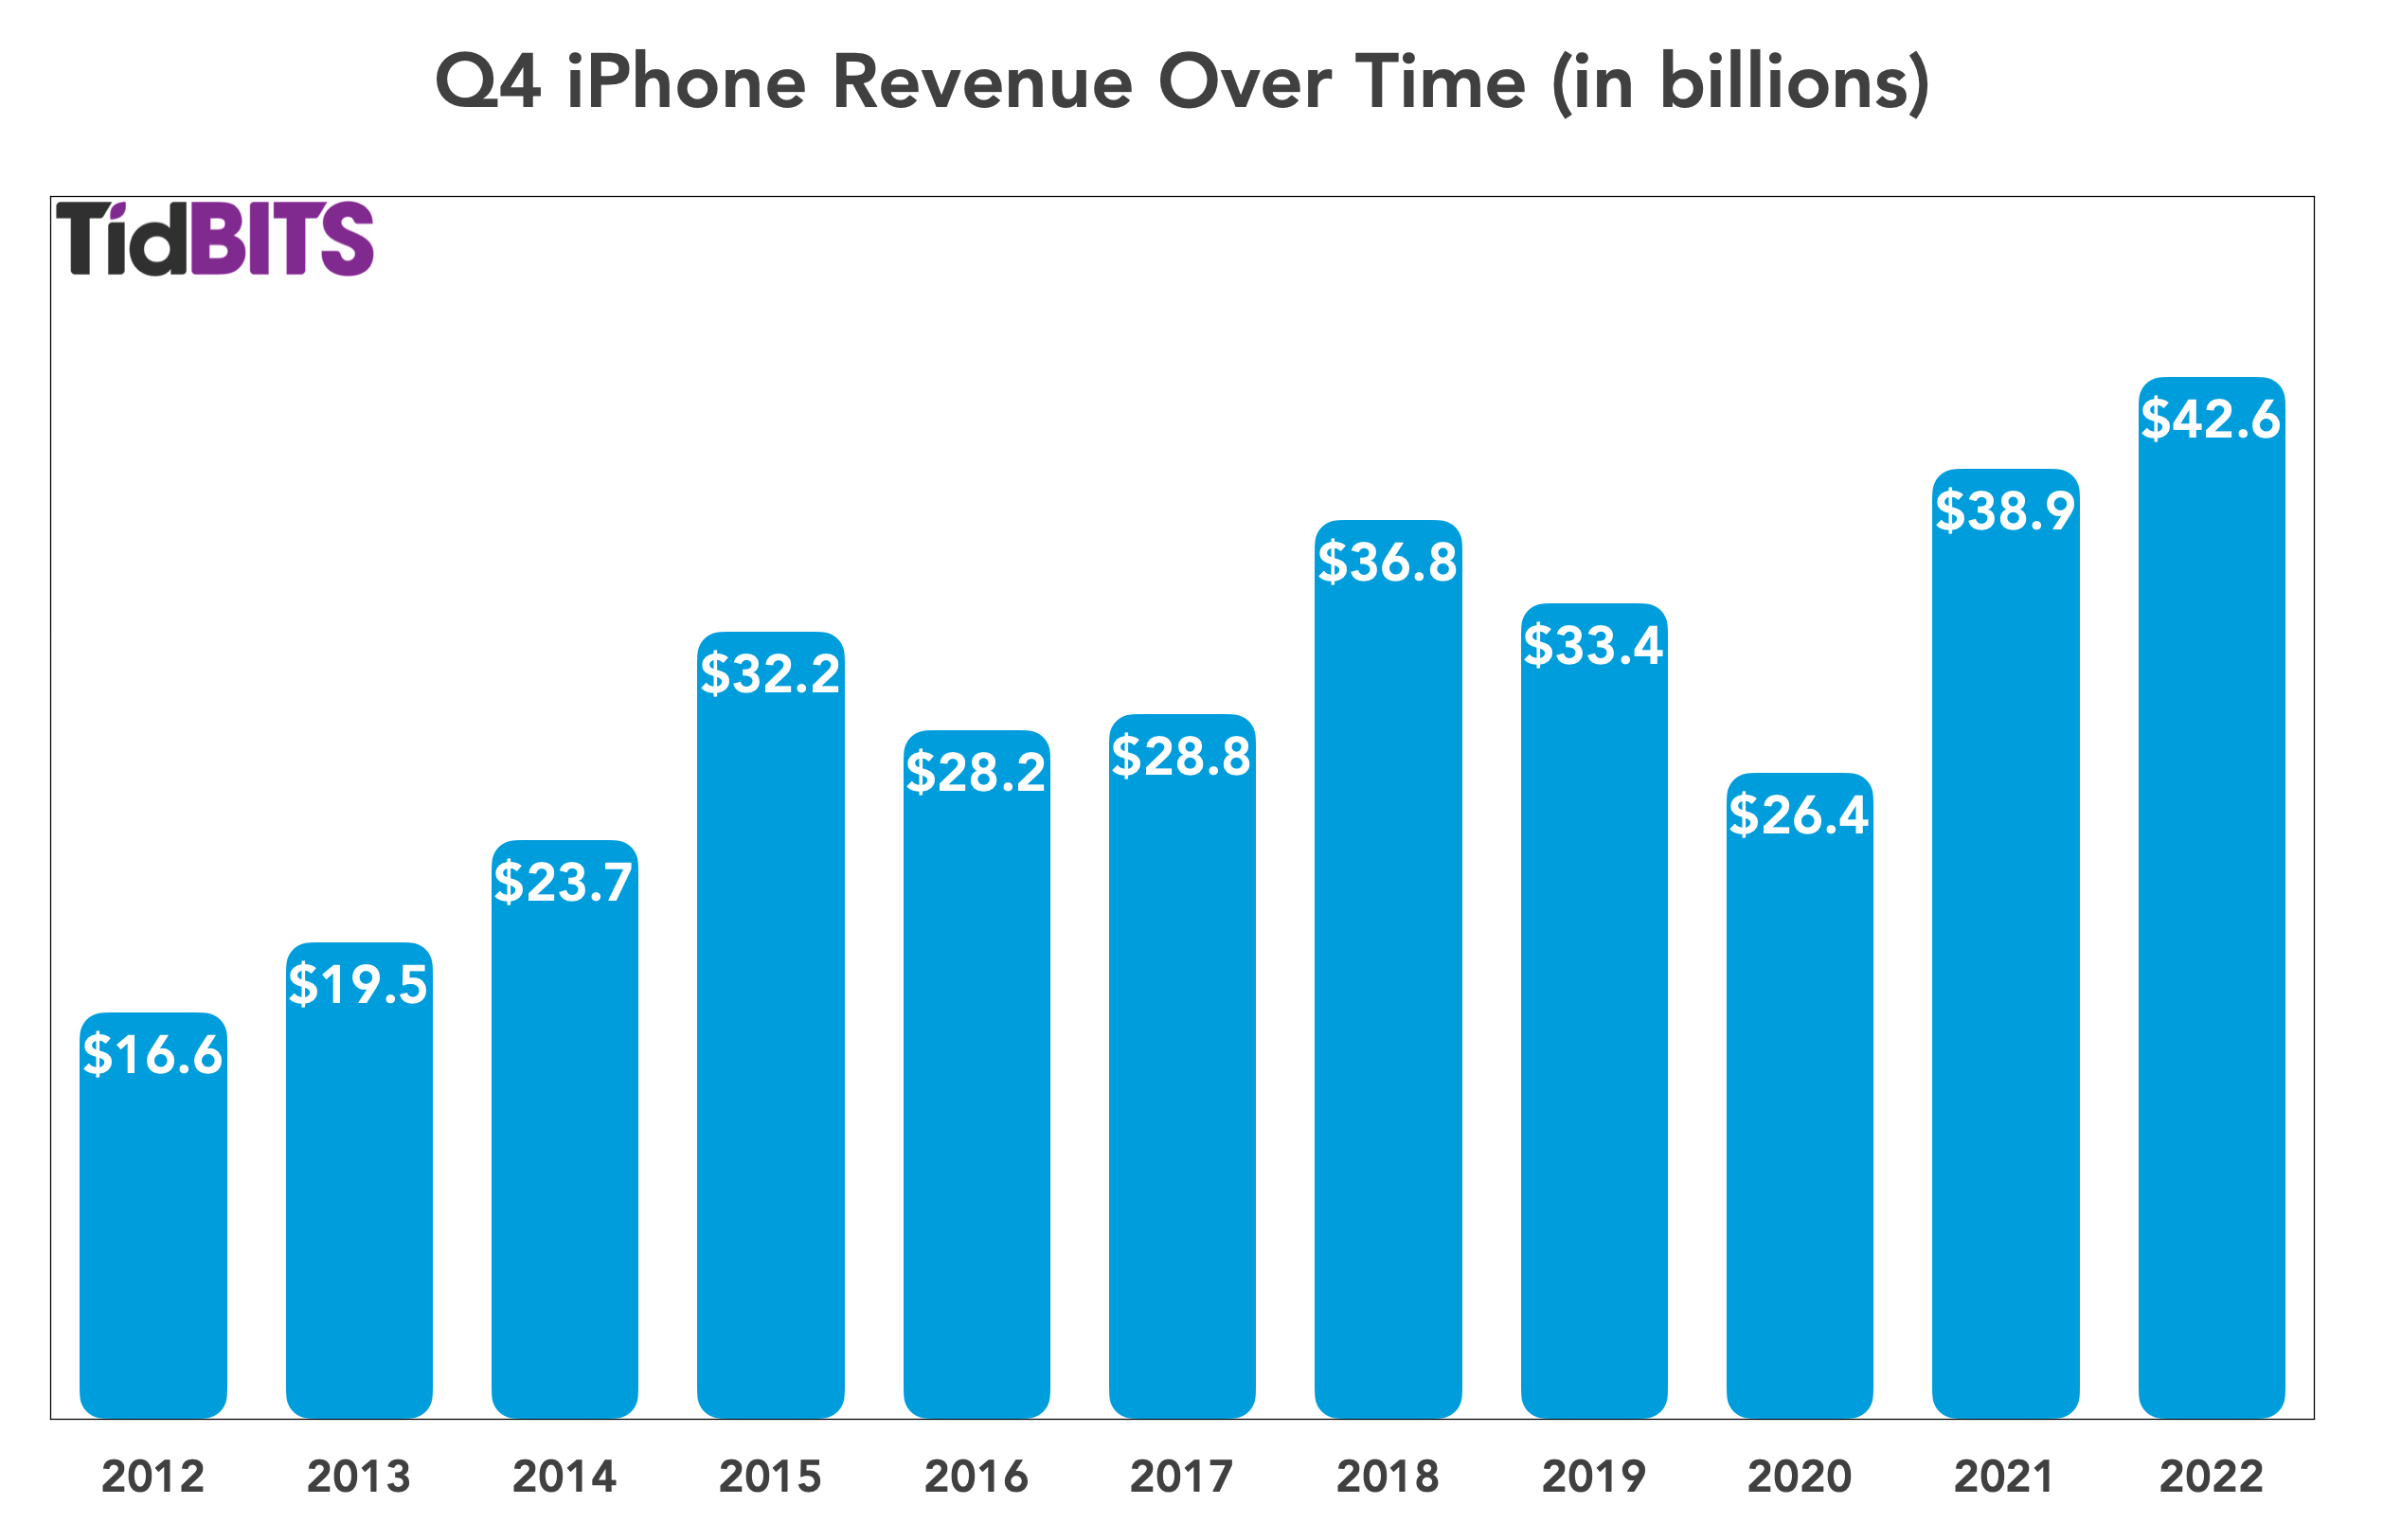 Q4 iPhone numbers